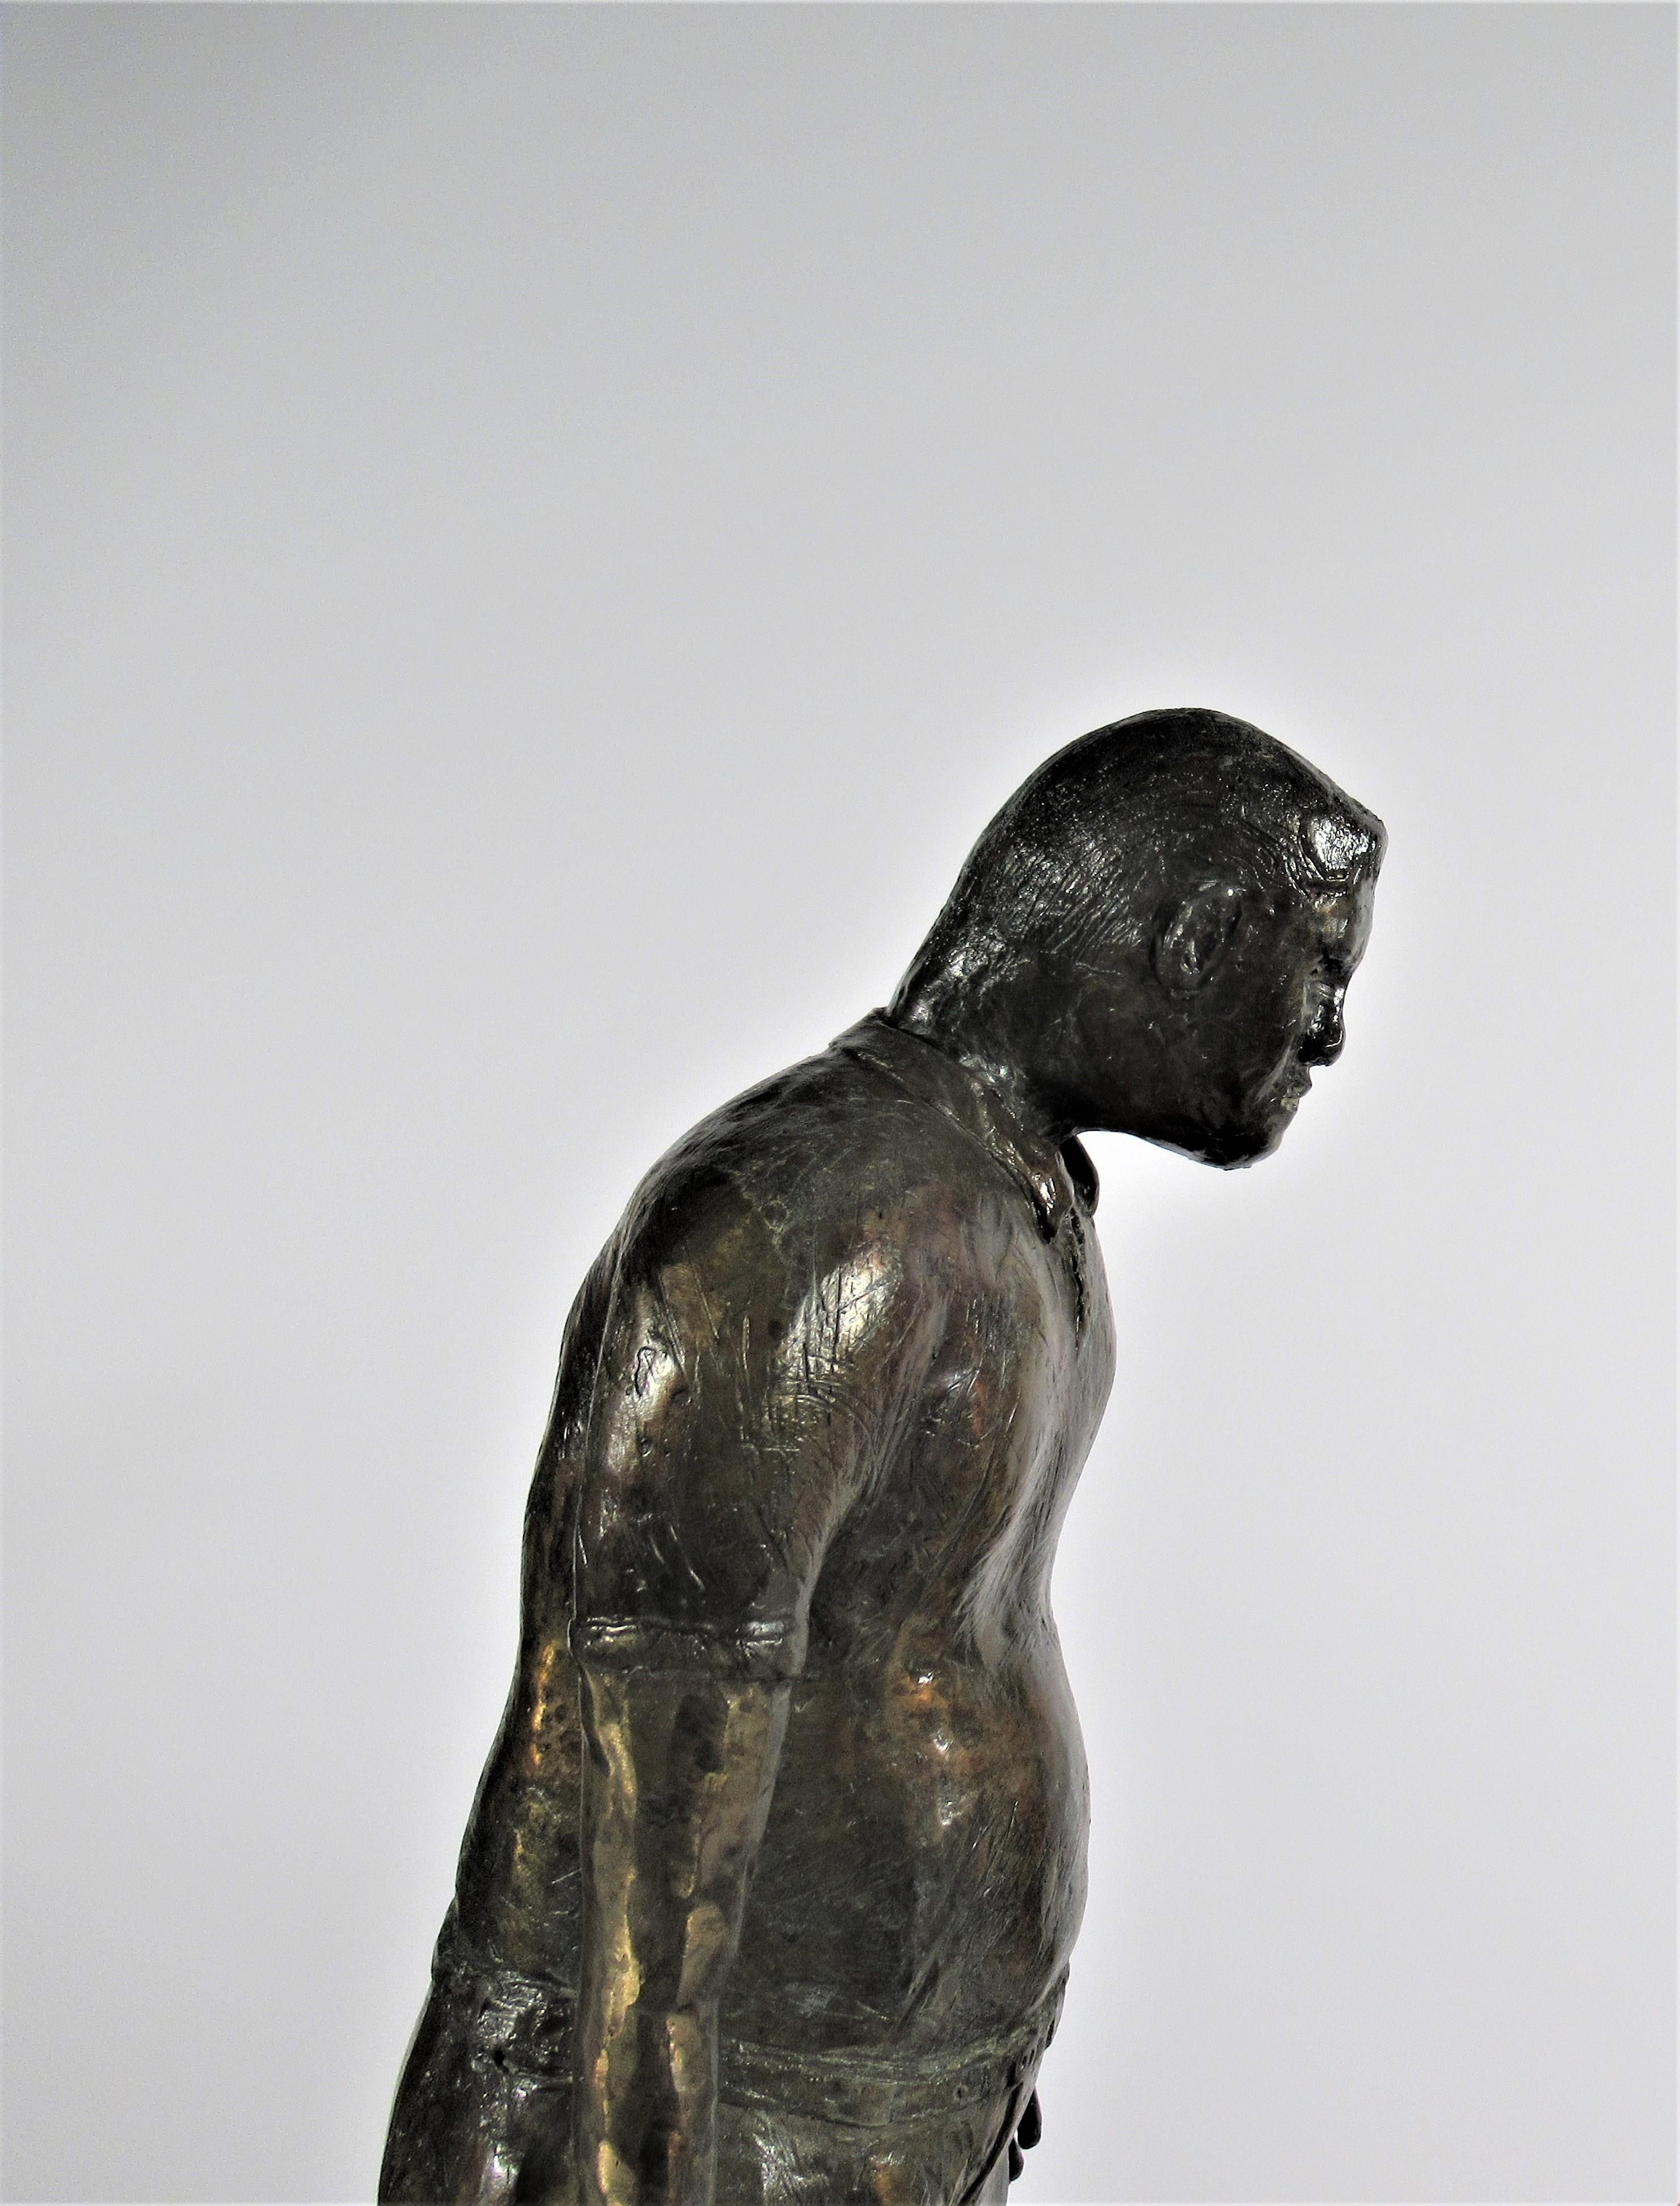 The Athlete and his Coach - American Realist Sculpture by Kenneth Johnson